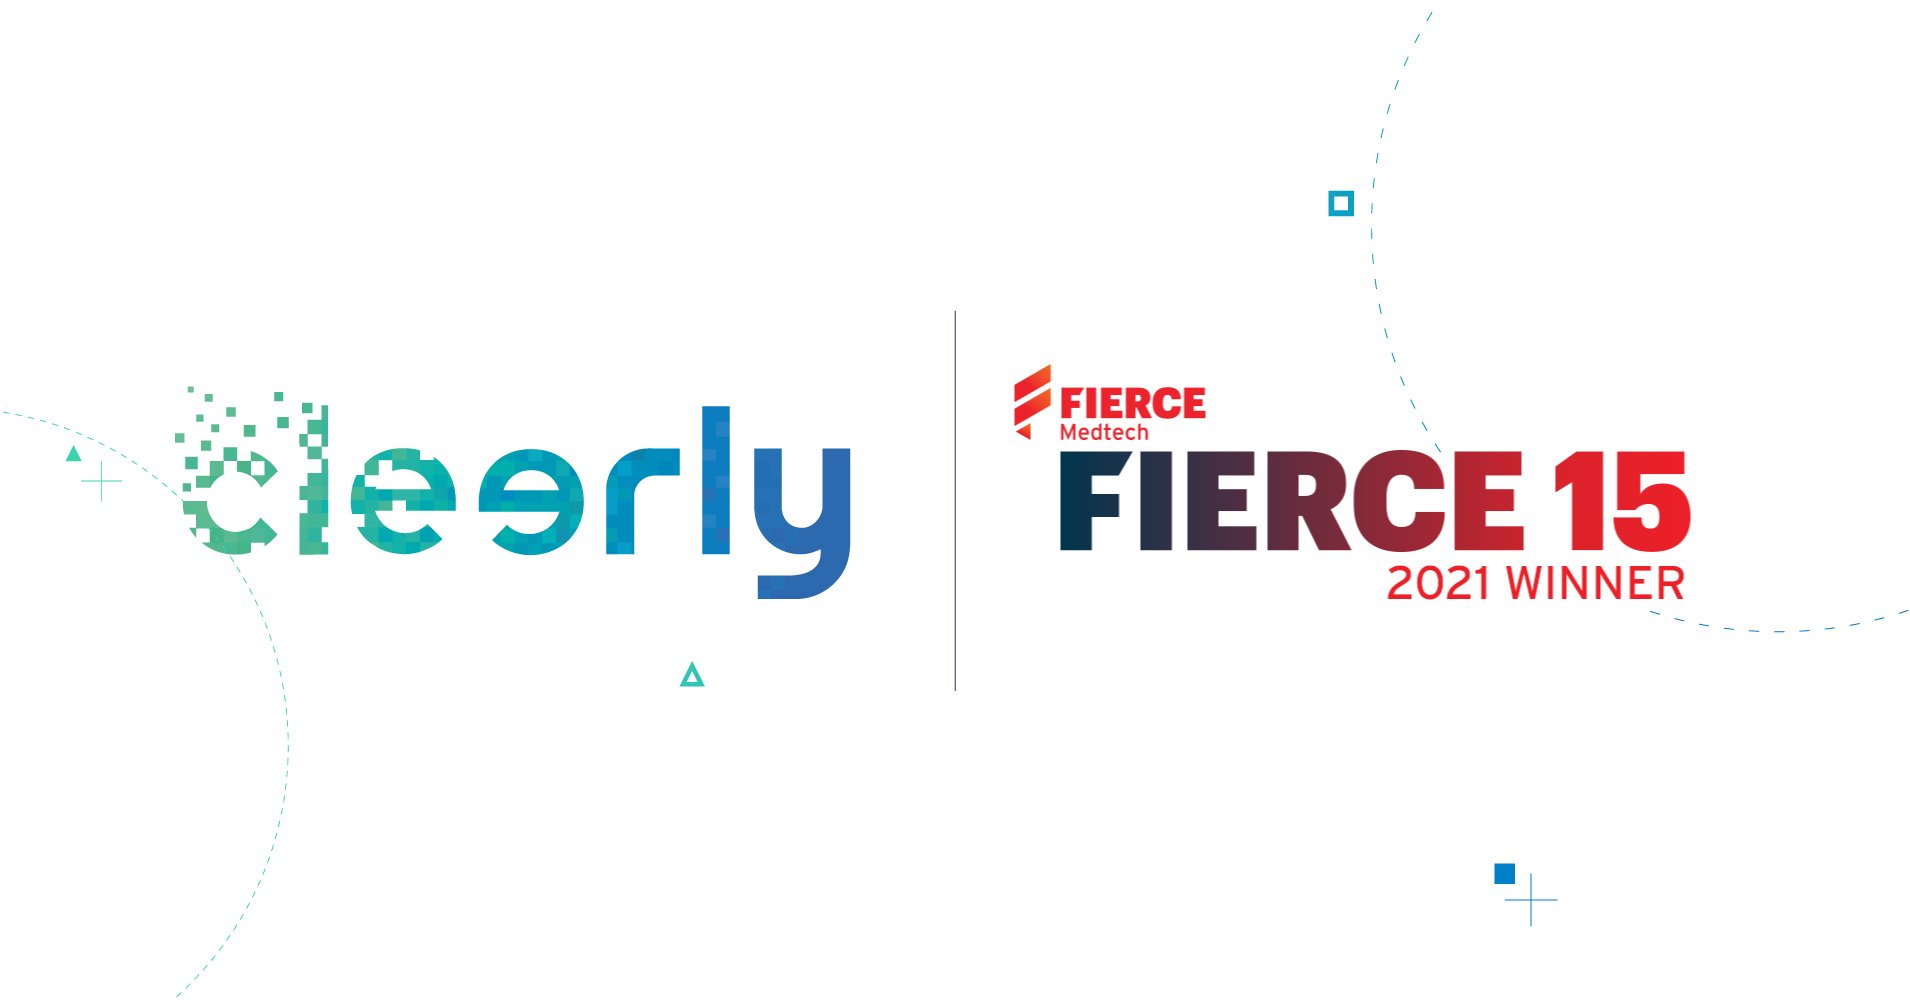 FIERCE MEDTECH NAMES CLEERLY ONE OF ITS 